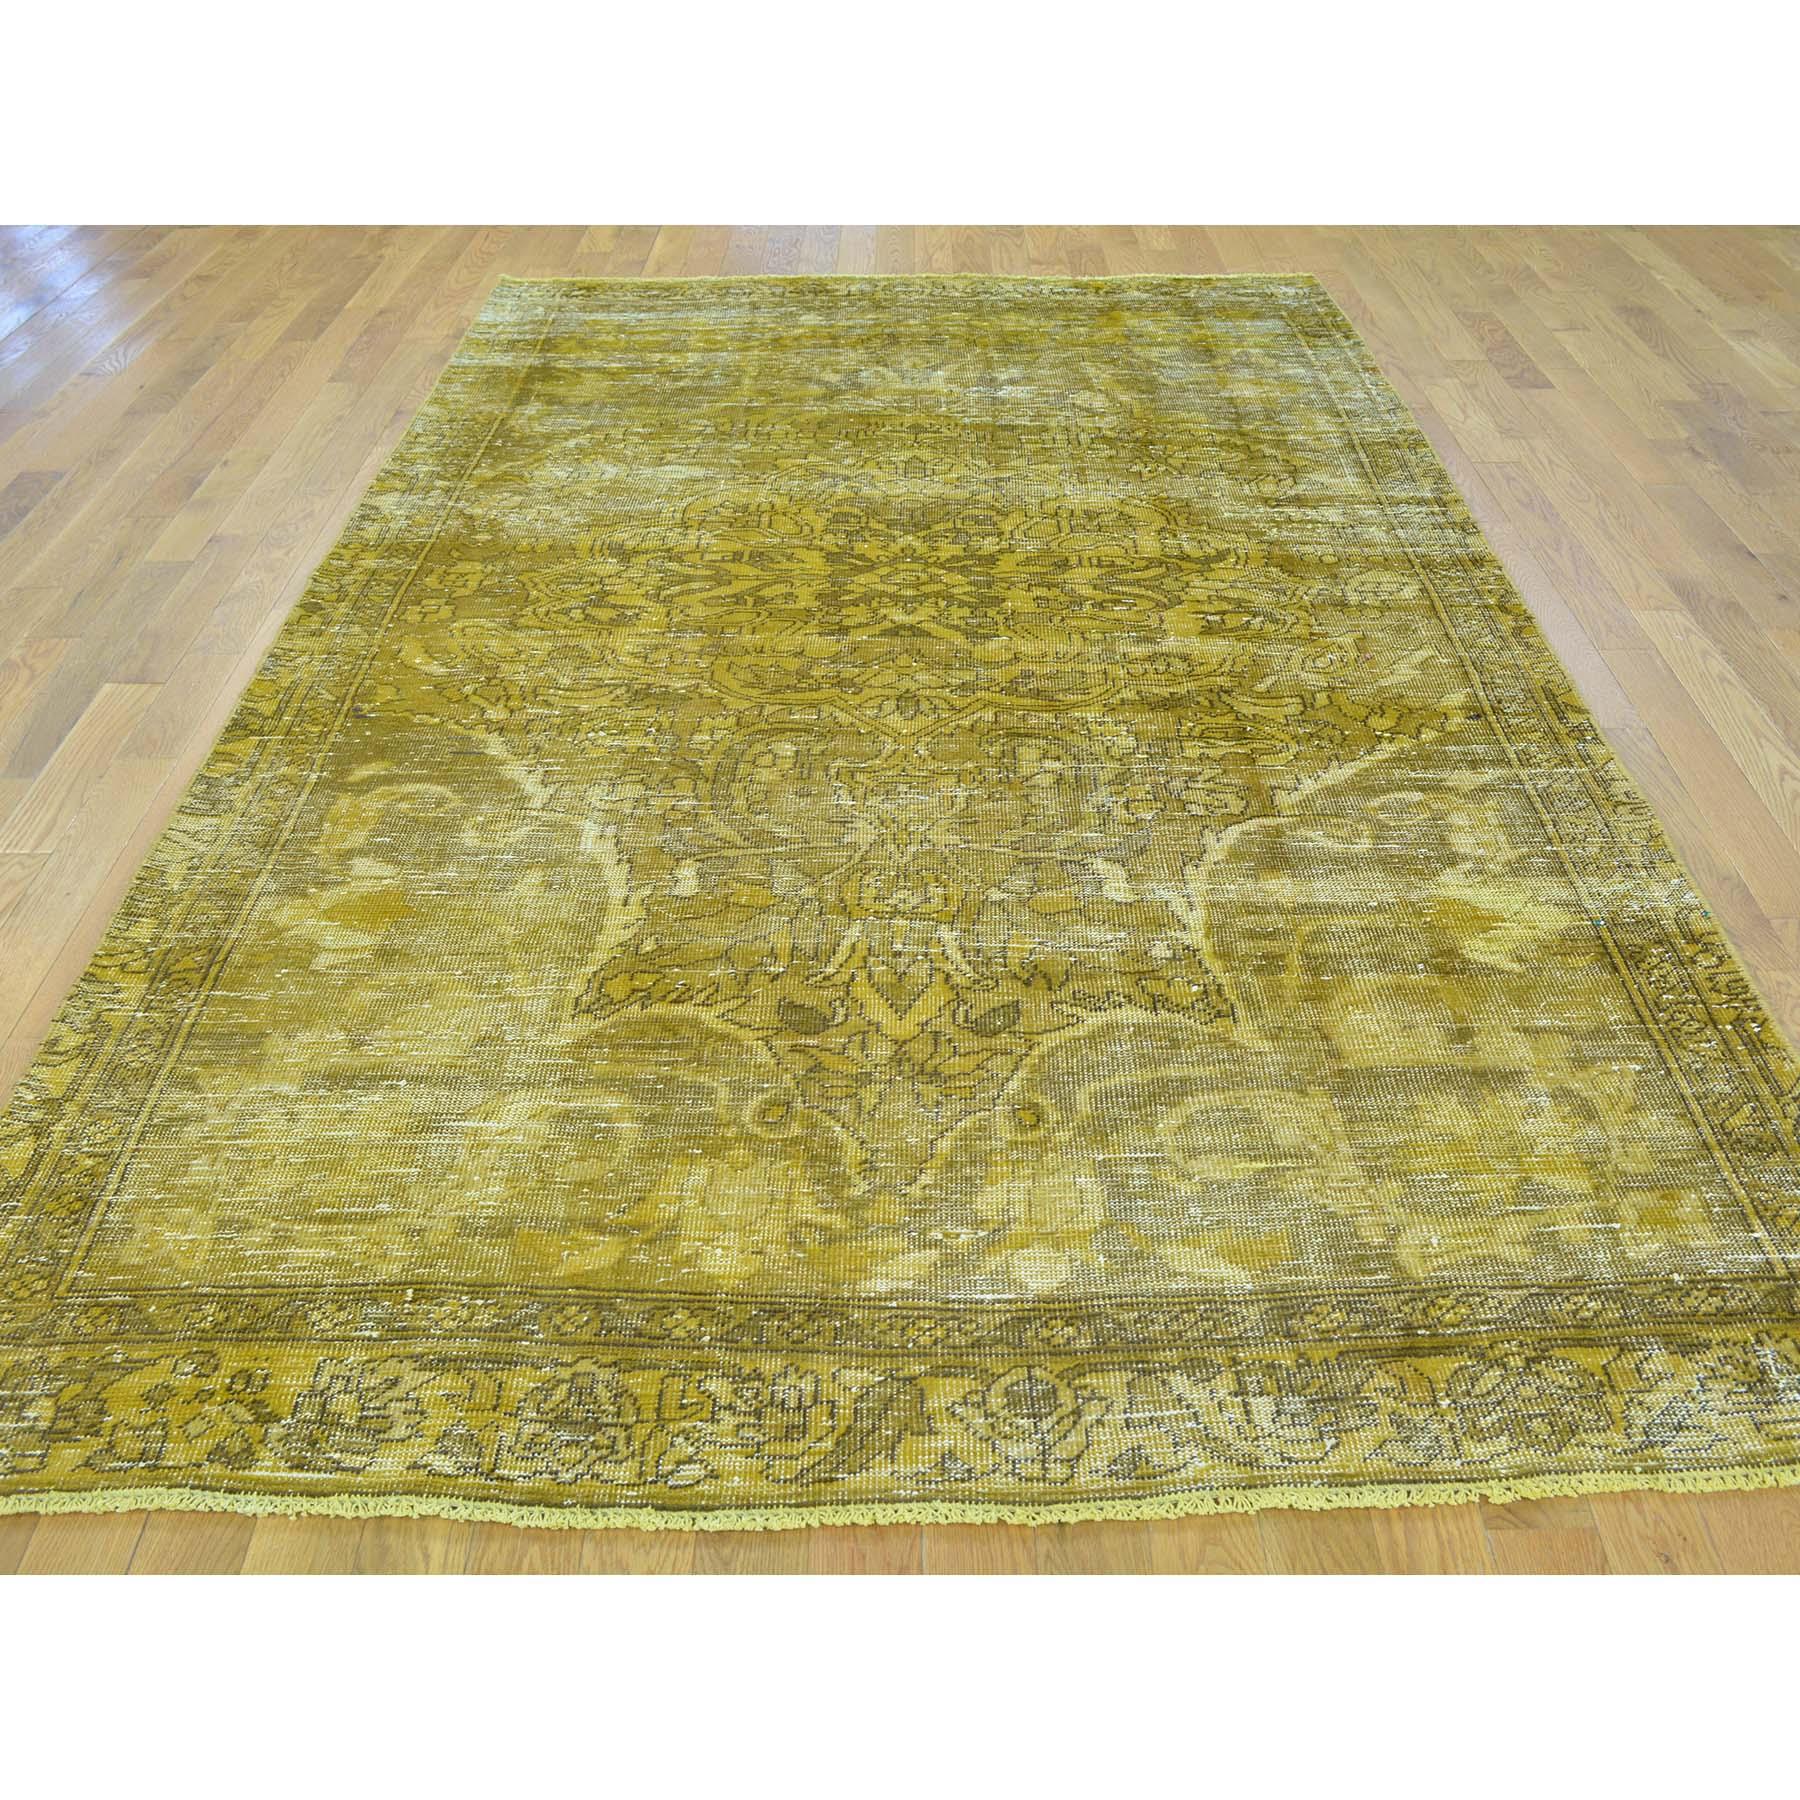 This is a truly genuine one-of-a-kind semi antique hand knotted Persian Bakhtiari overdyed vintage rug. It has been knotted for months and months in the centuries-old Persian weaving craftsmanship techniques by expert artisans.

 Primary materials: